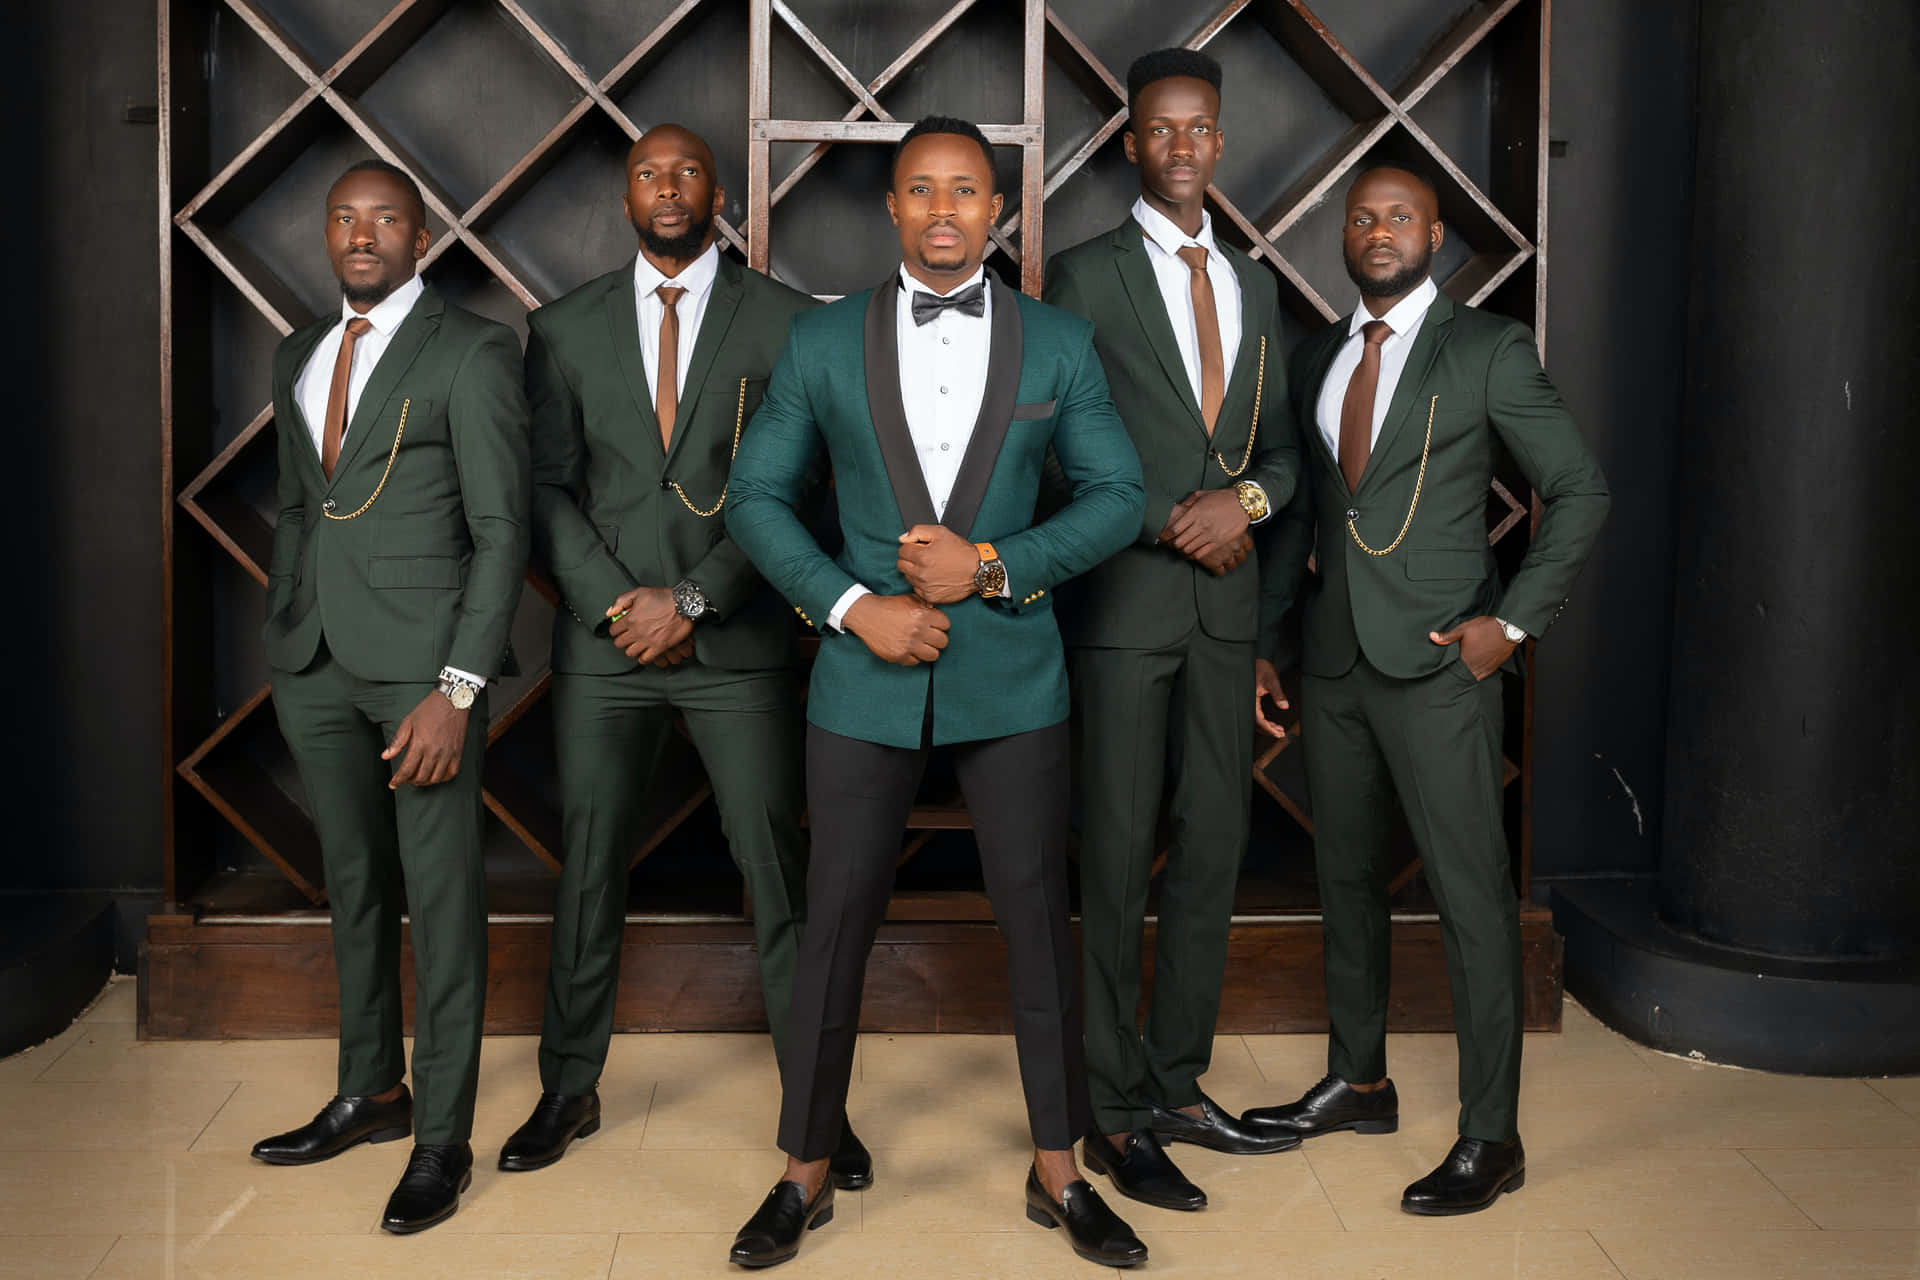 Five groomsmen stands proud in their smart suites on the wedding day